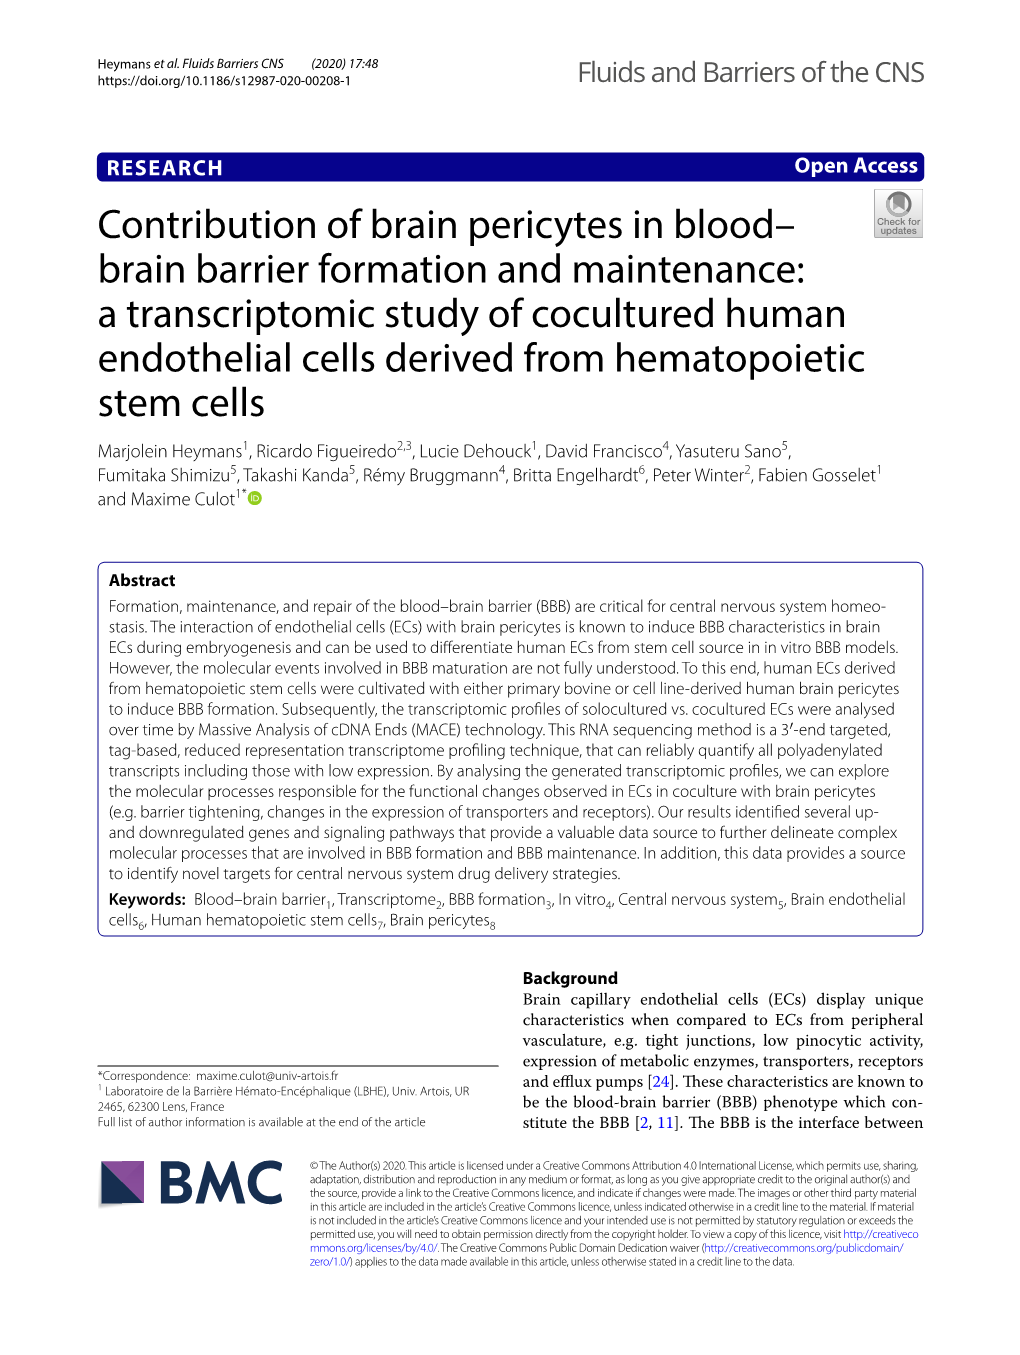 Contribution of Brain Pericytes in Blood–Brain Barrier Formation And